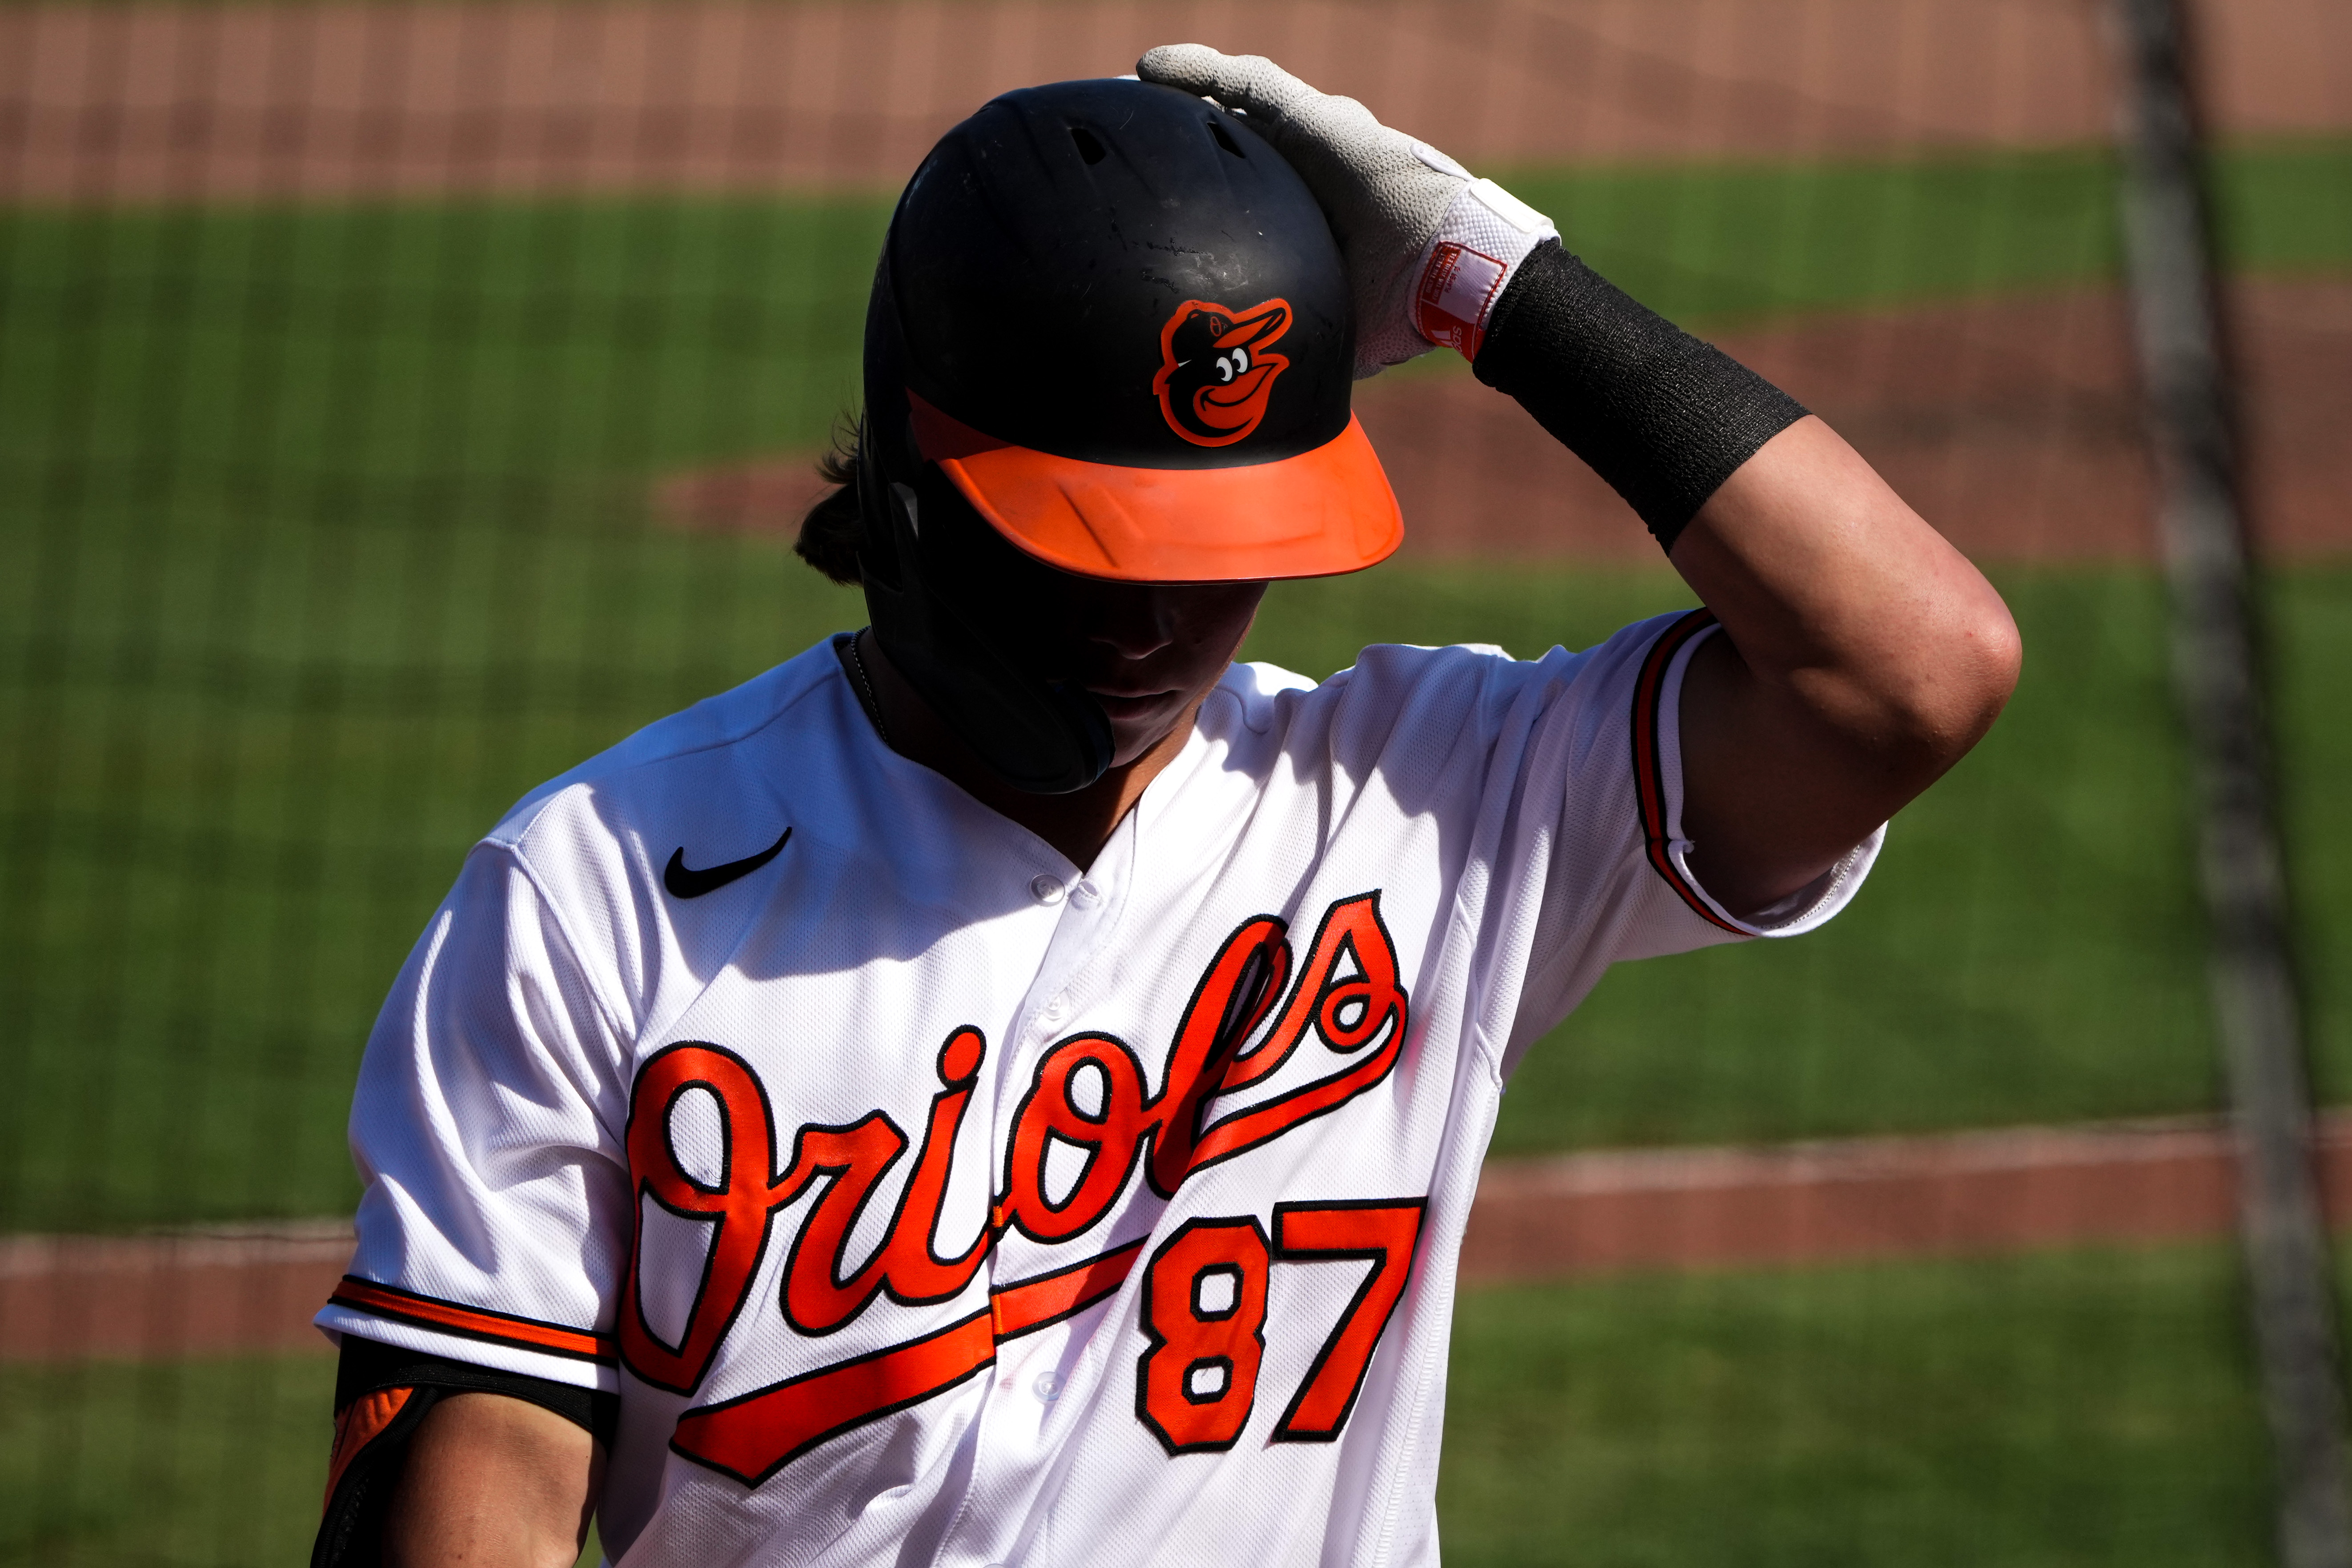 Potential Orioles Draft Pick Jackson Holliday: Going No. 1 Would